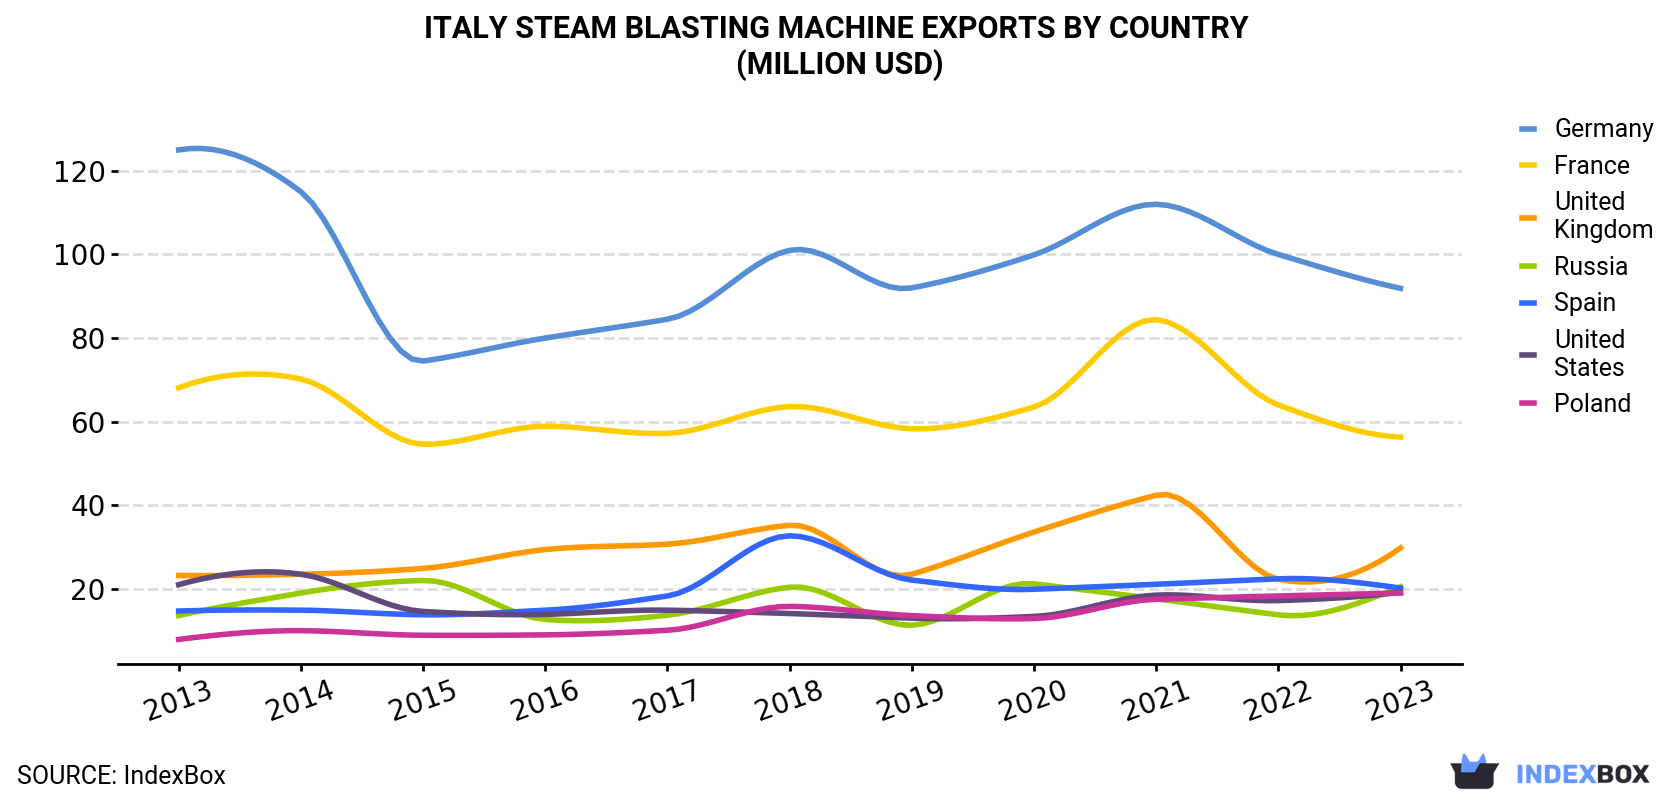 Italy Steam Blasting Machine Exports By Country (Million USD)